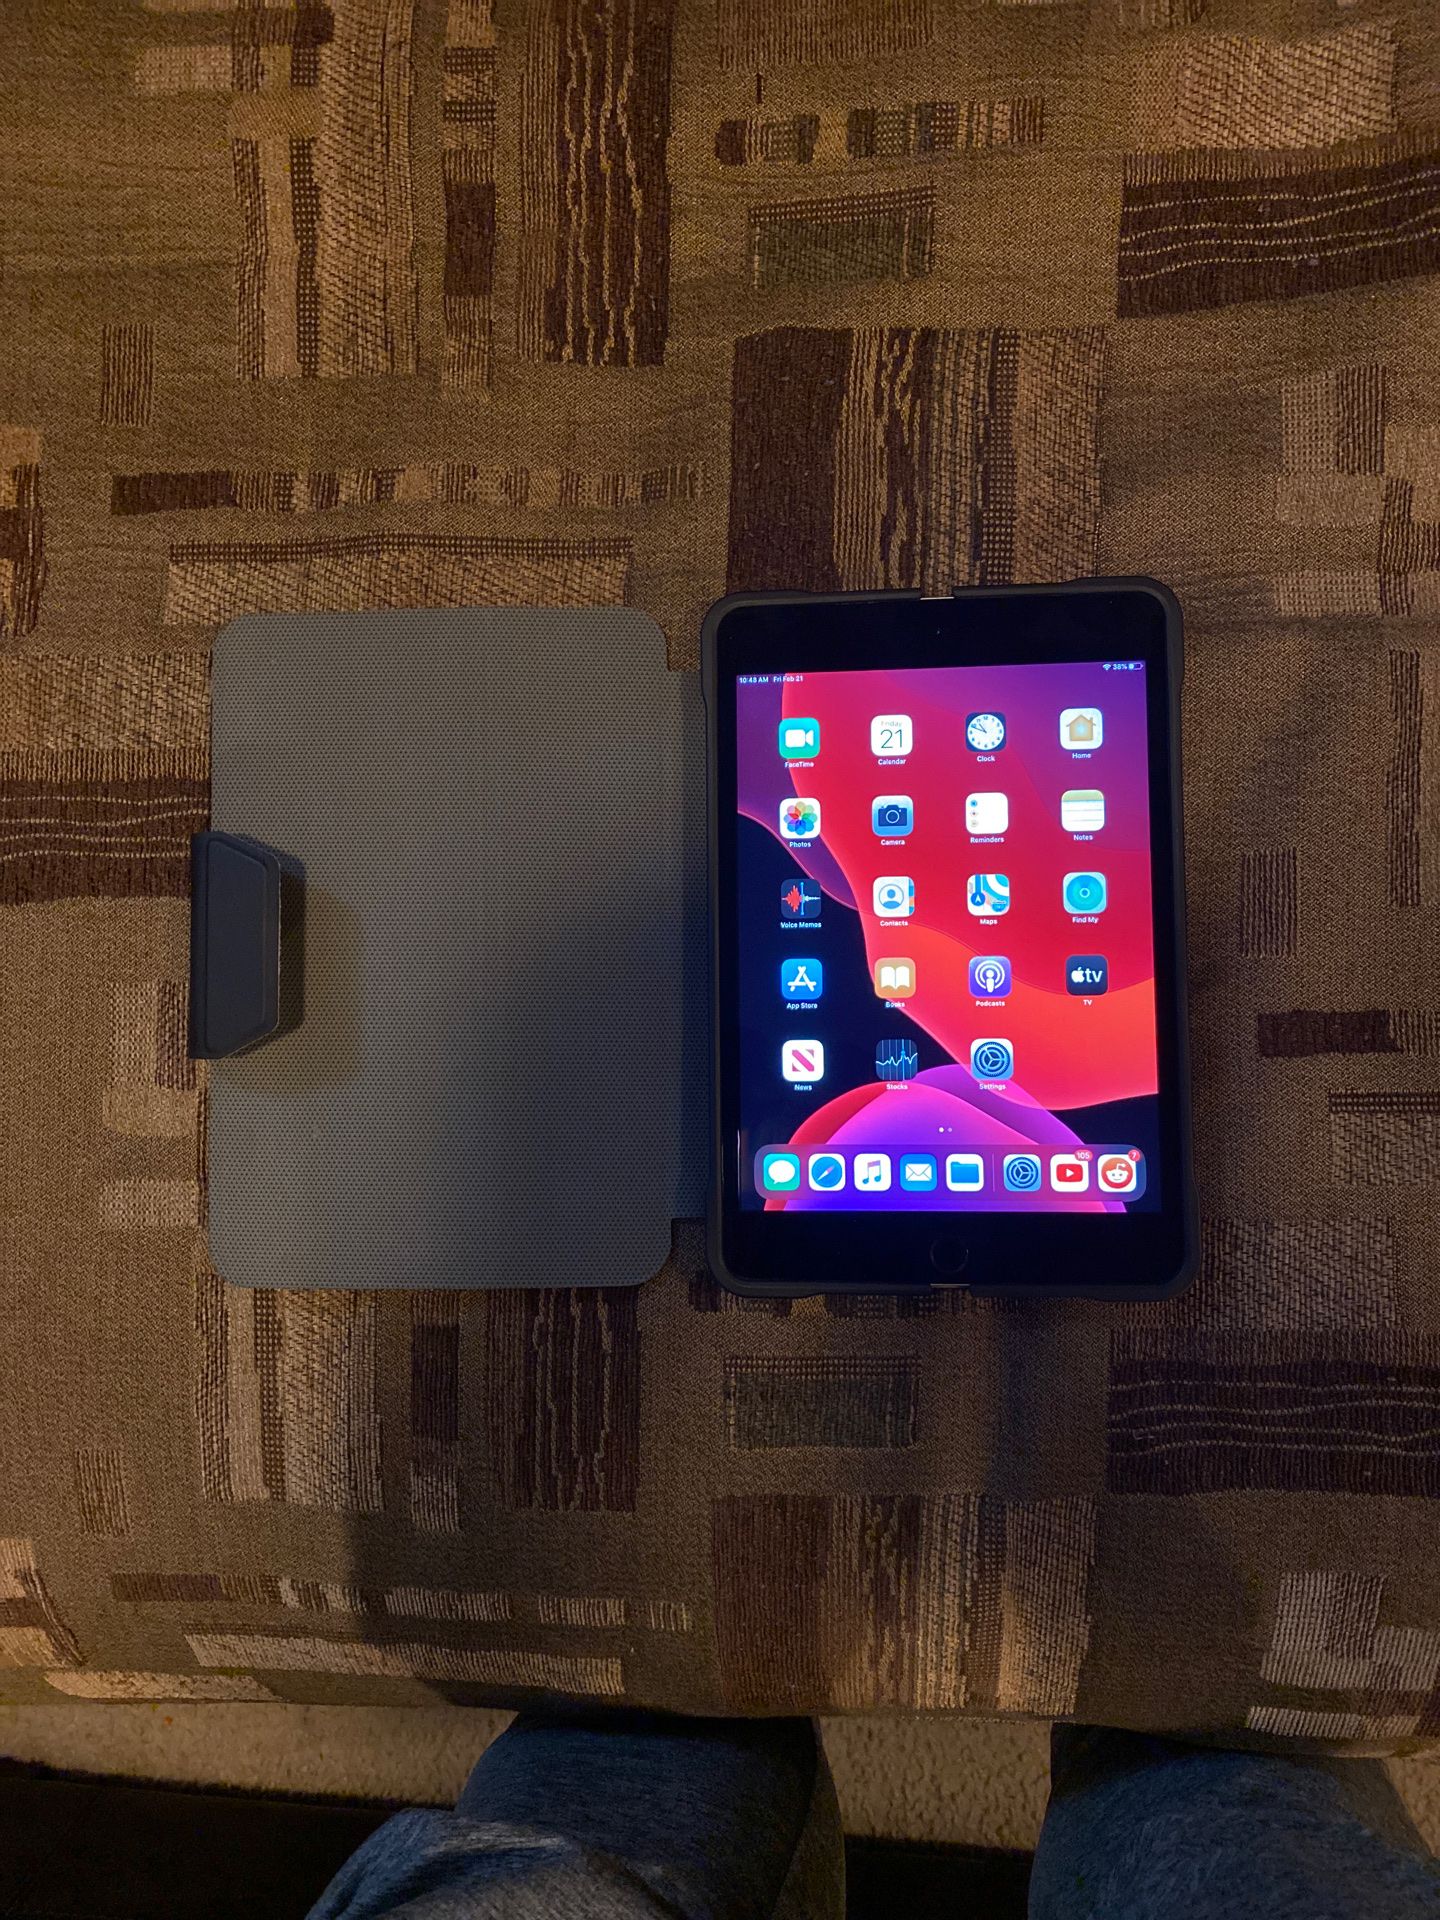 iPad mini 4 128 gigs WiFi only (like new condition)